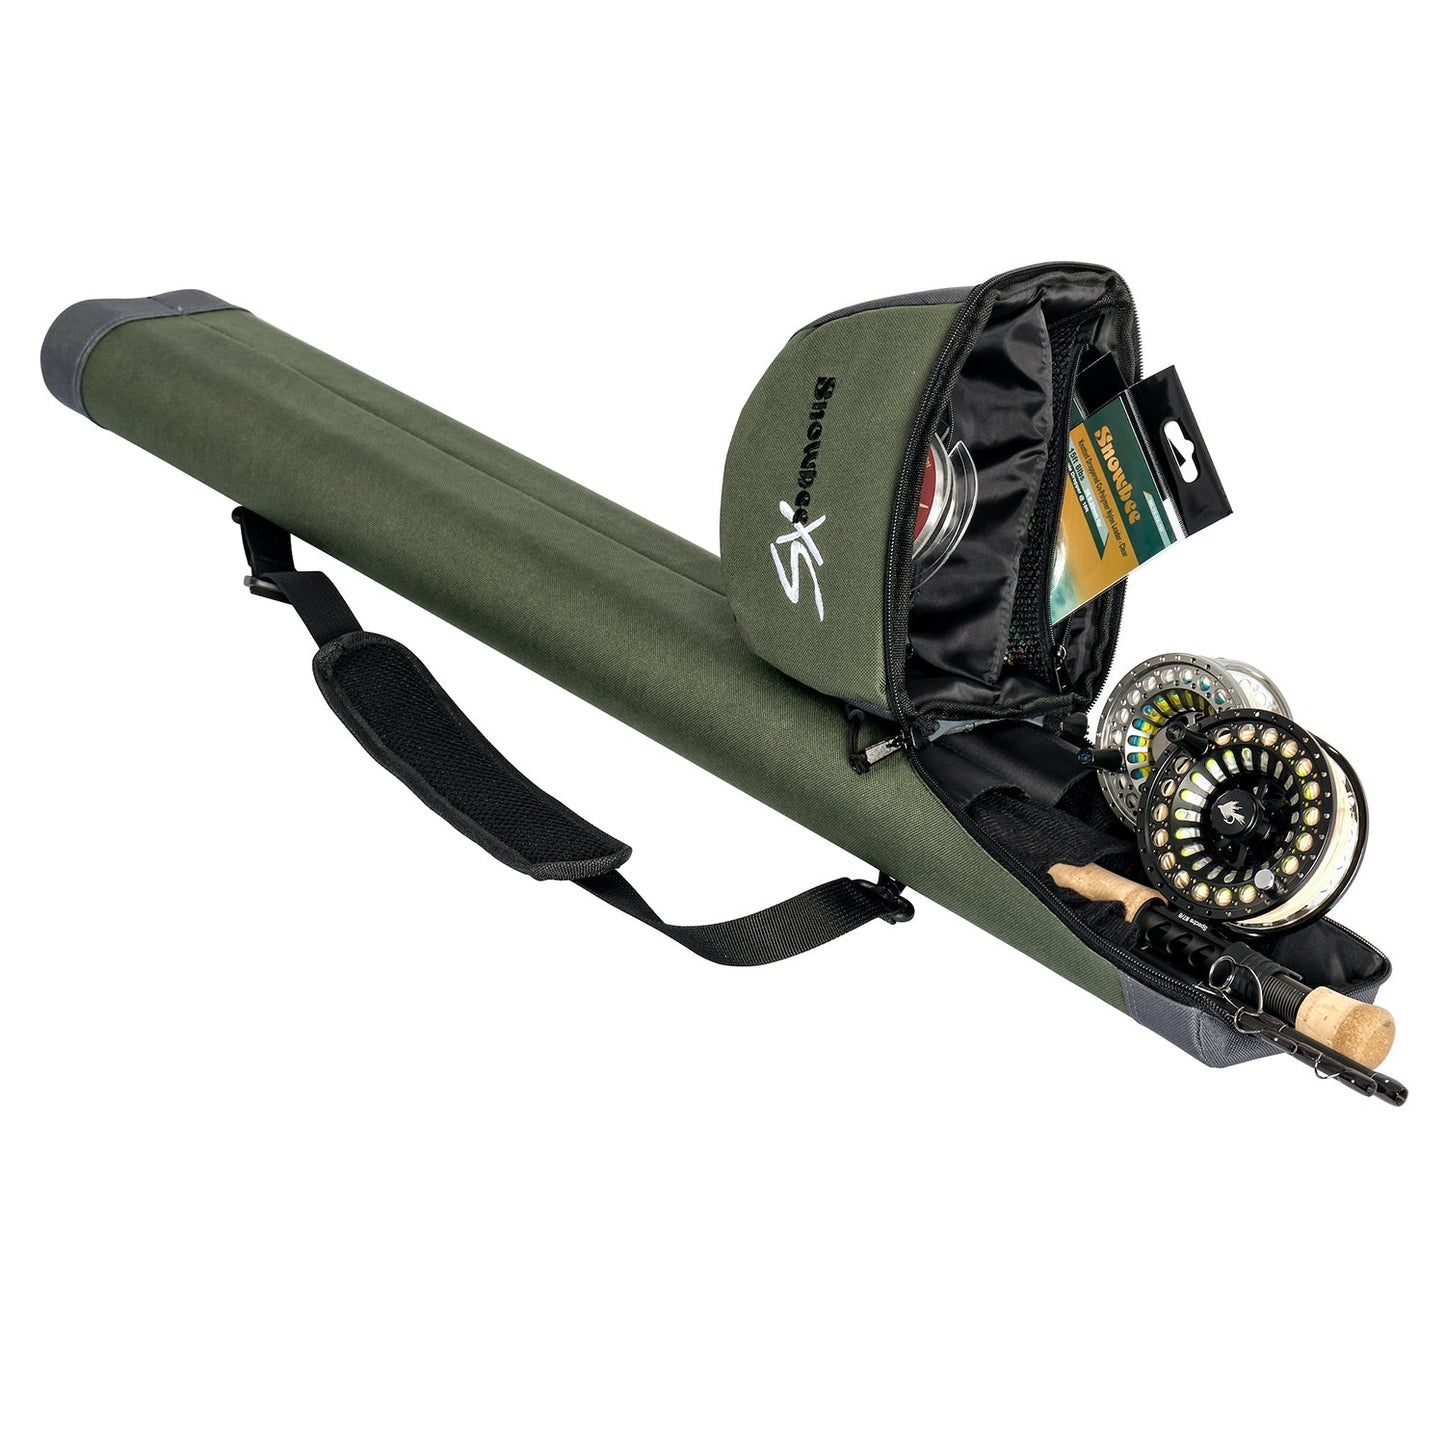 XS Travel Fly Rod/Reel Cases by Snowbee USA